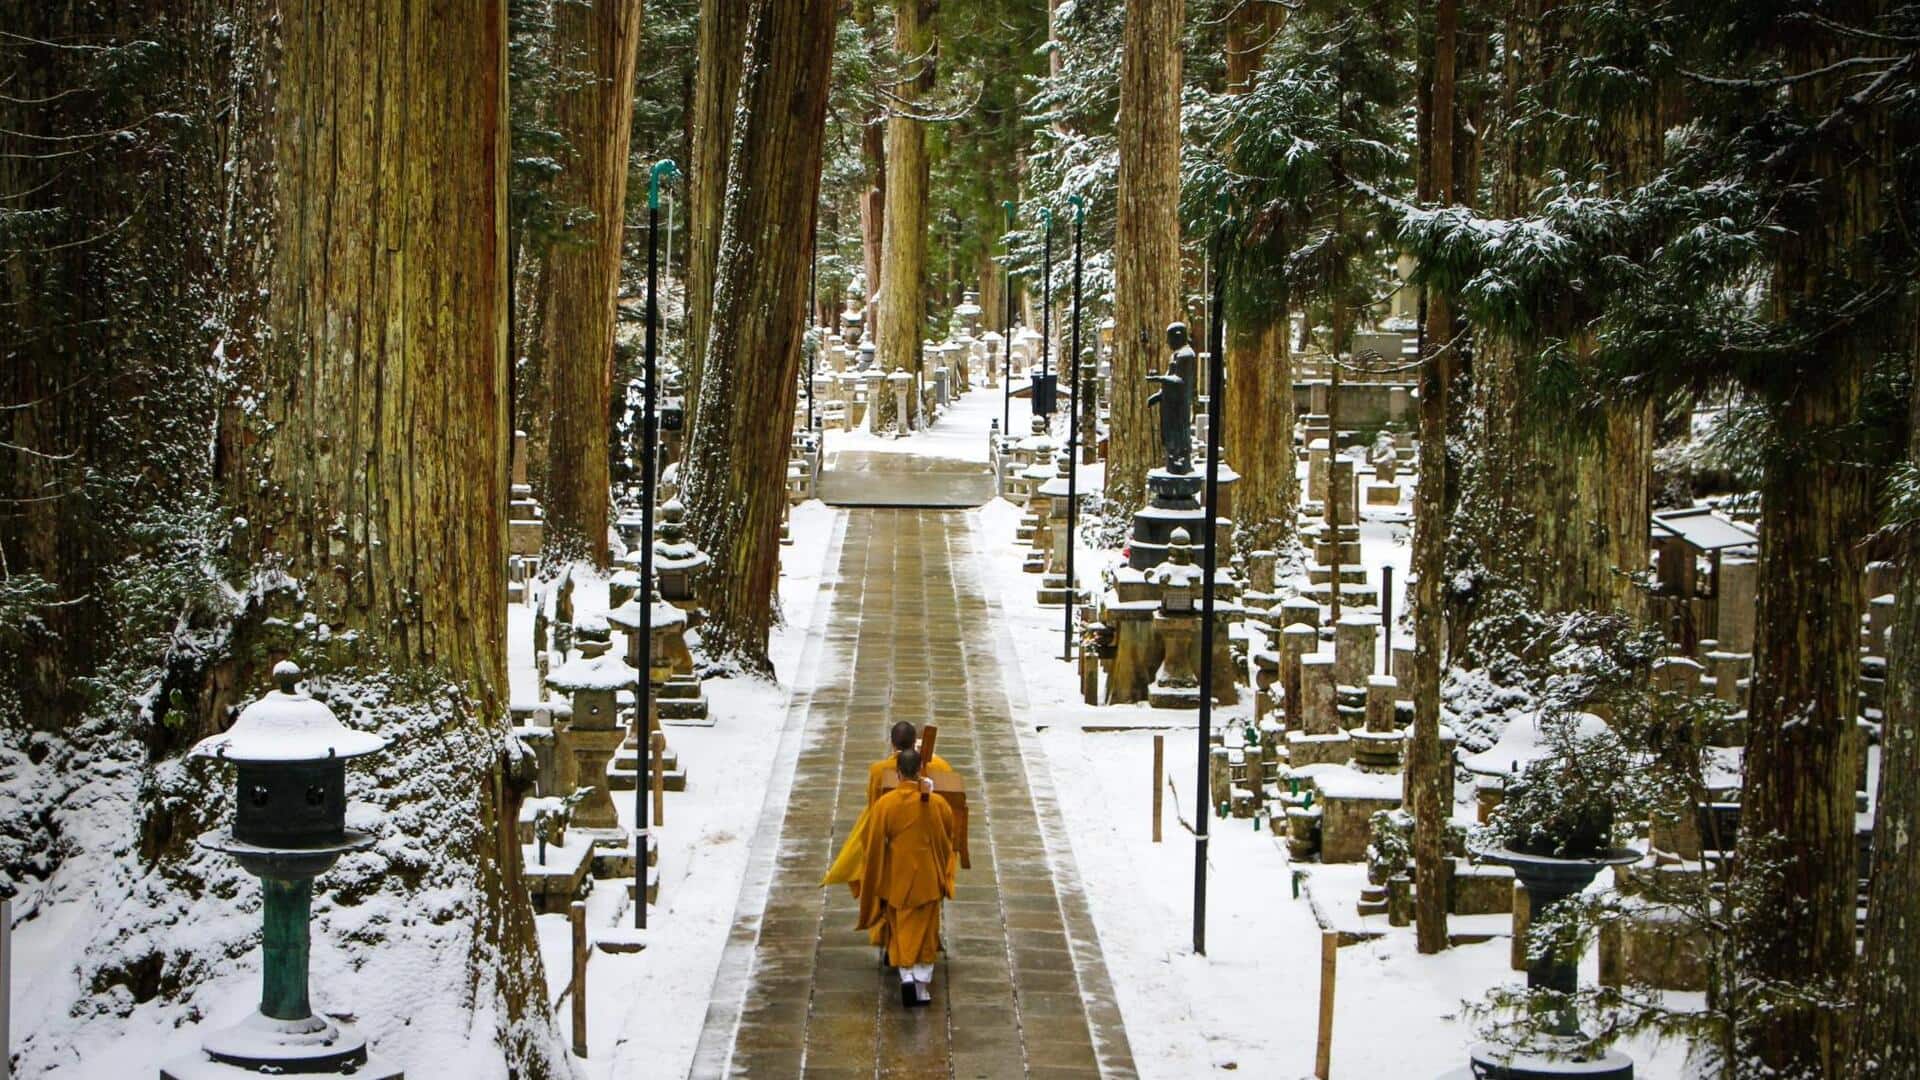 Things to do in Koyasan, Japan for an unforgettable trip